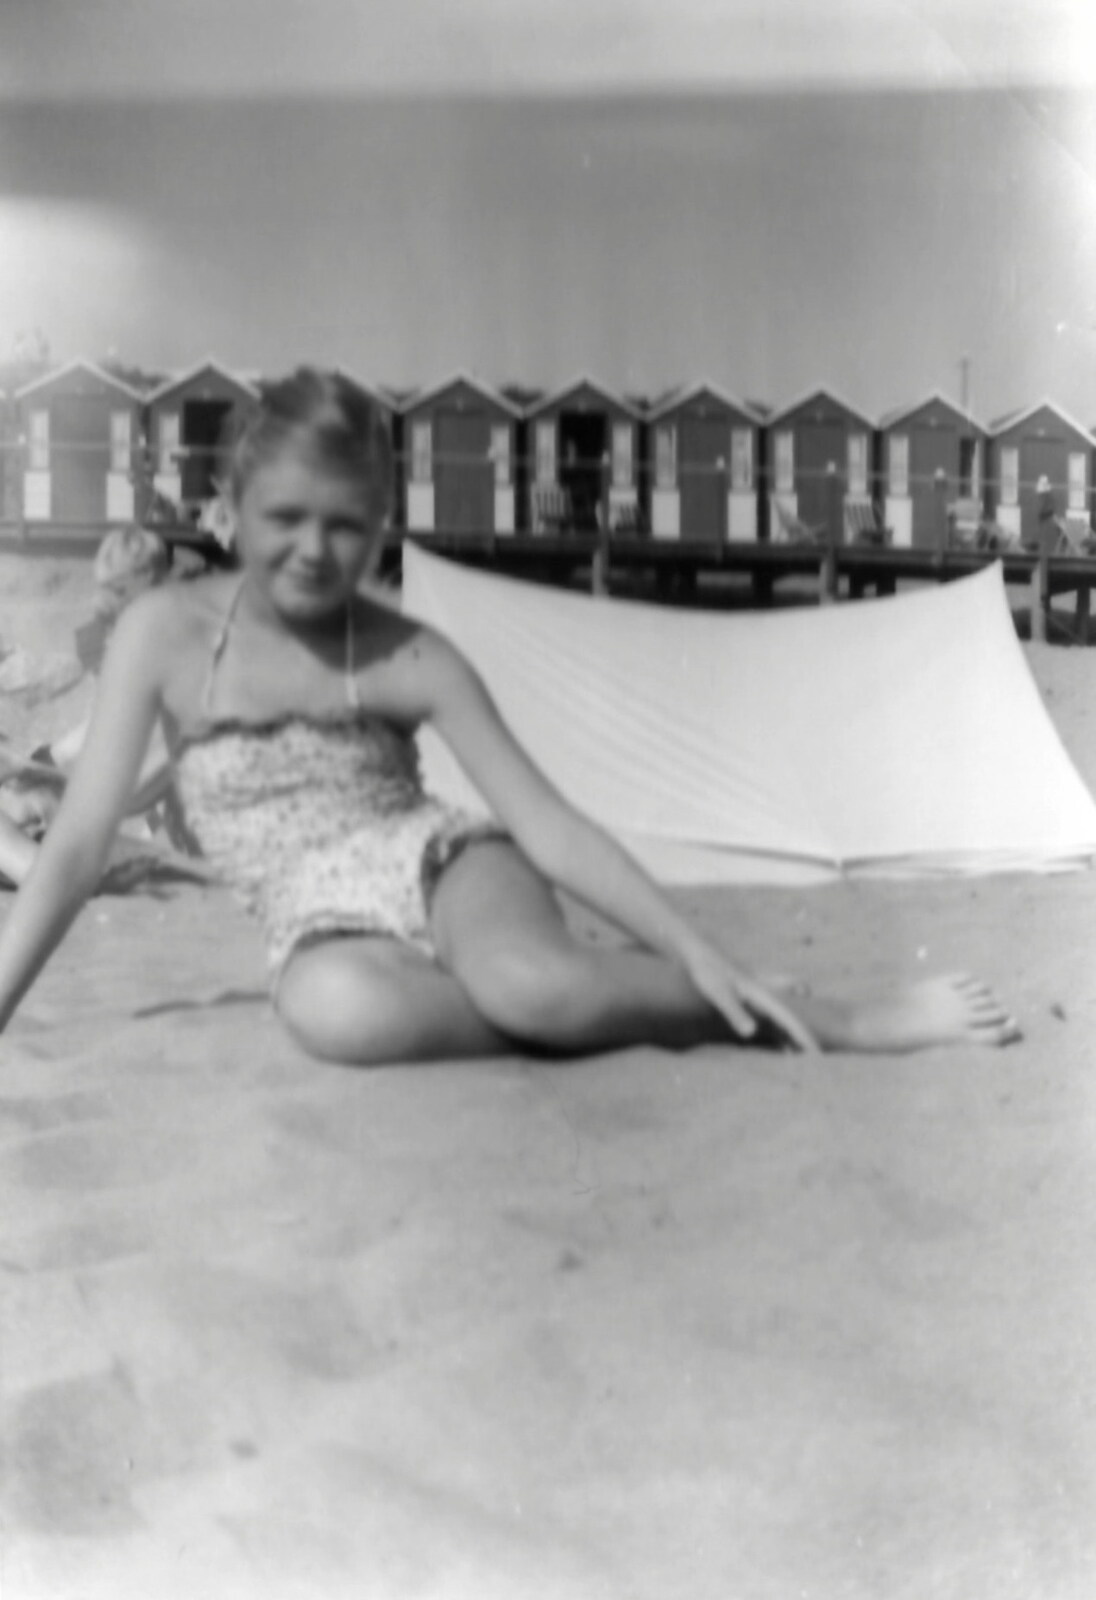 Janet on the beach at Southport from Family History: The 1940s and 1950s - 24th January 2020